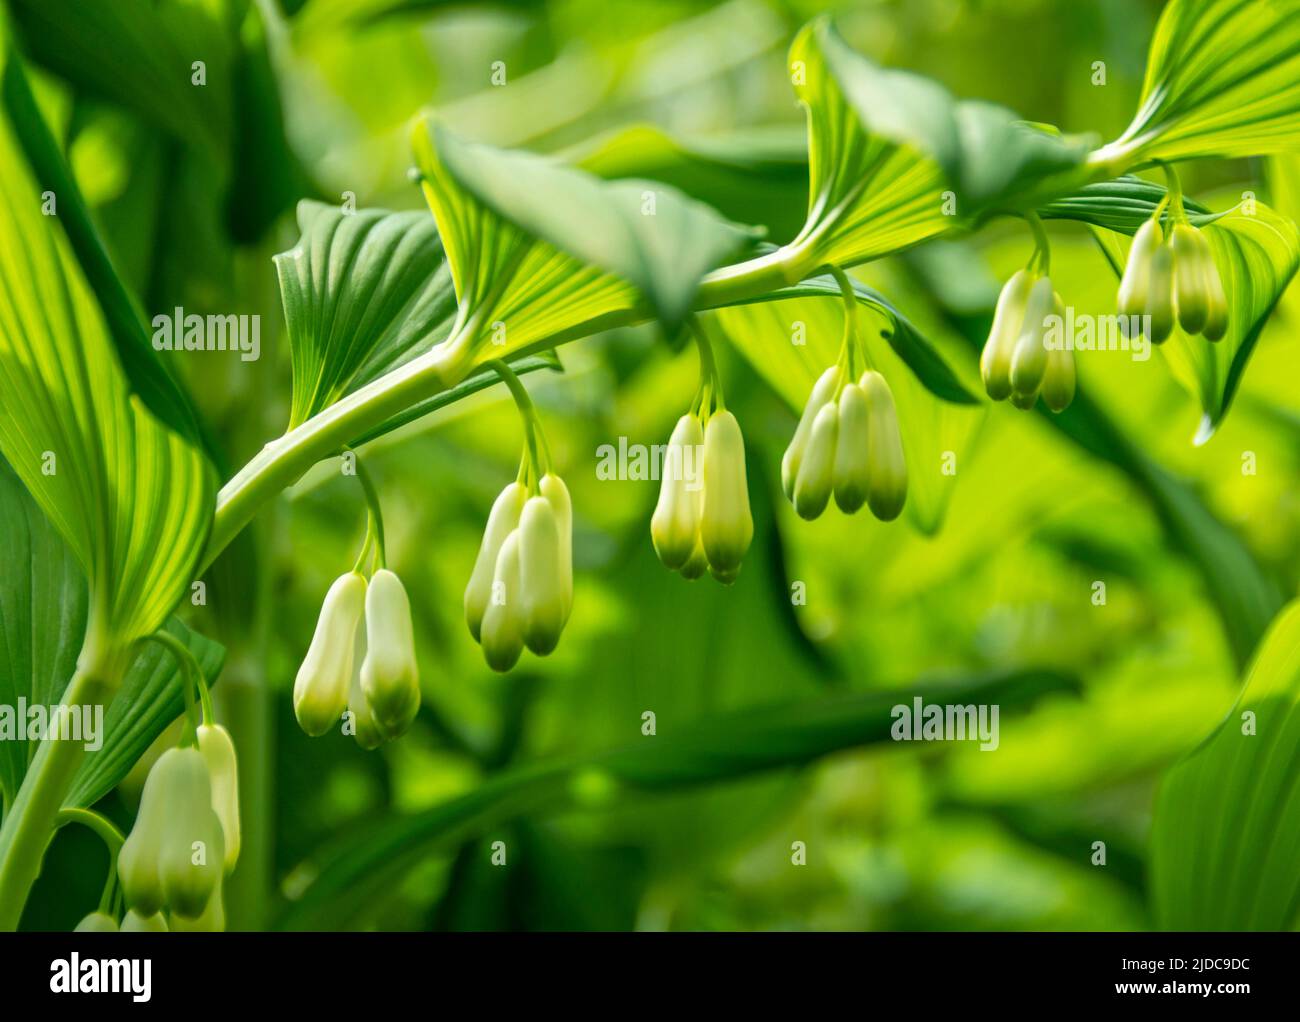 Solomon's Seal flowering plant, a perennial with graceful arching stems Stock Photo